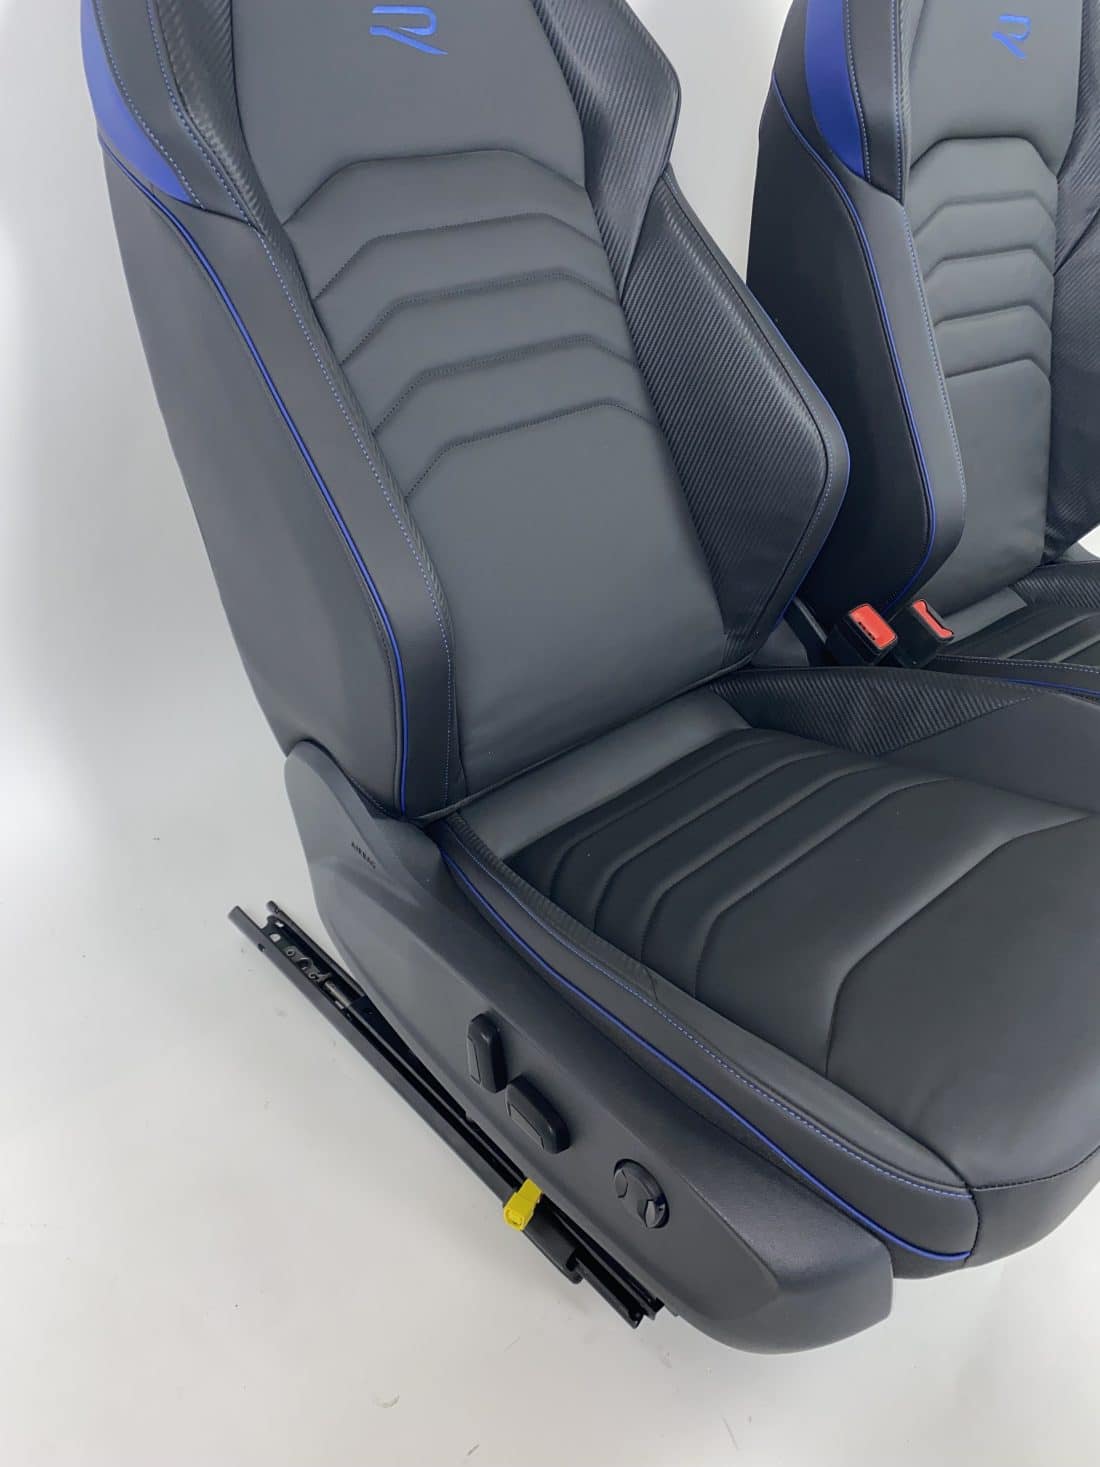 Trp Post Container Data Trp Post Id 11366 Interior Vw Arteon Shooting Break R Black Leather Blue Stitching Trp Post Container